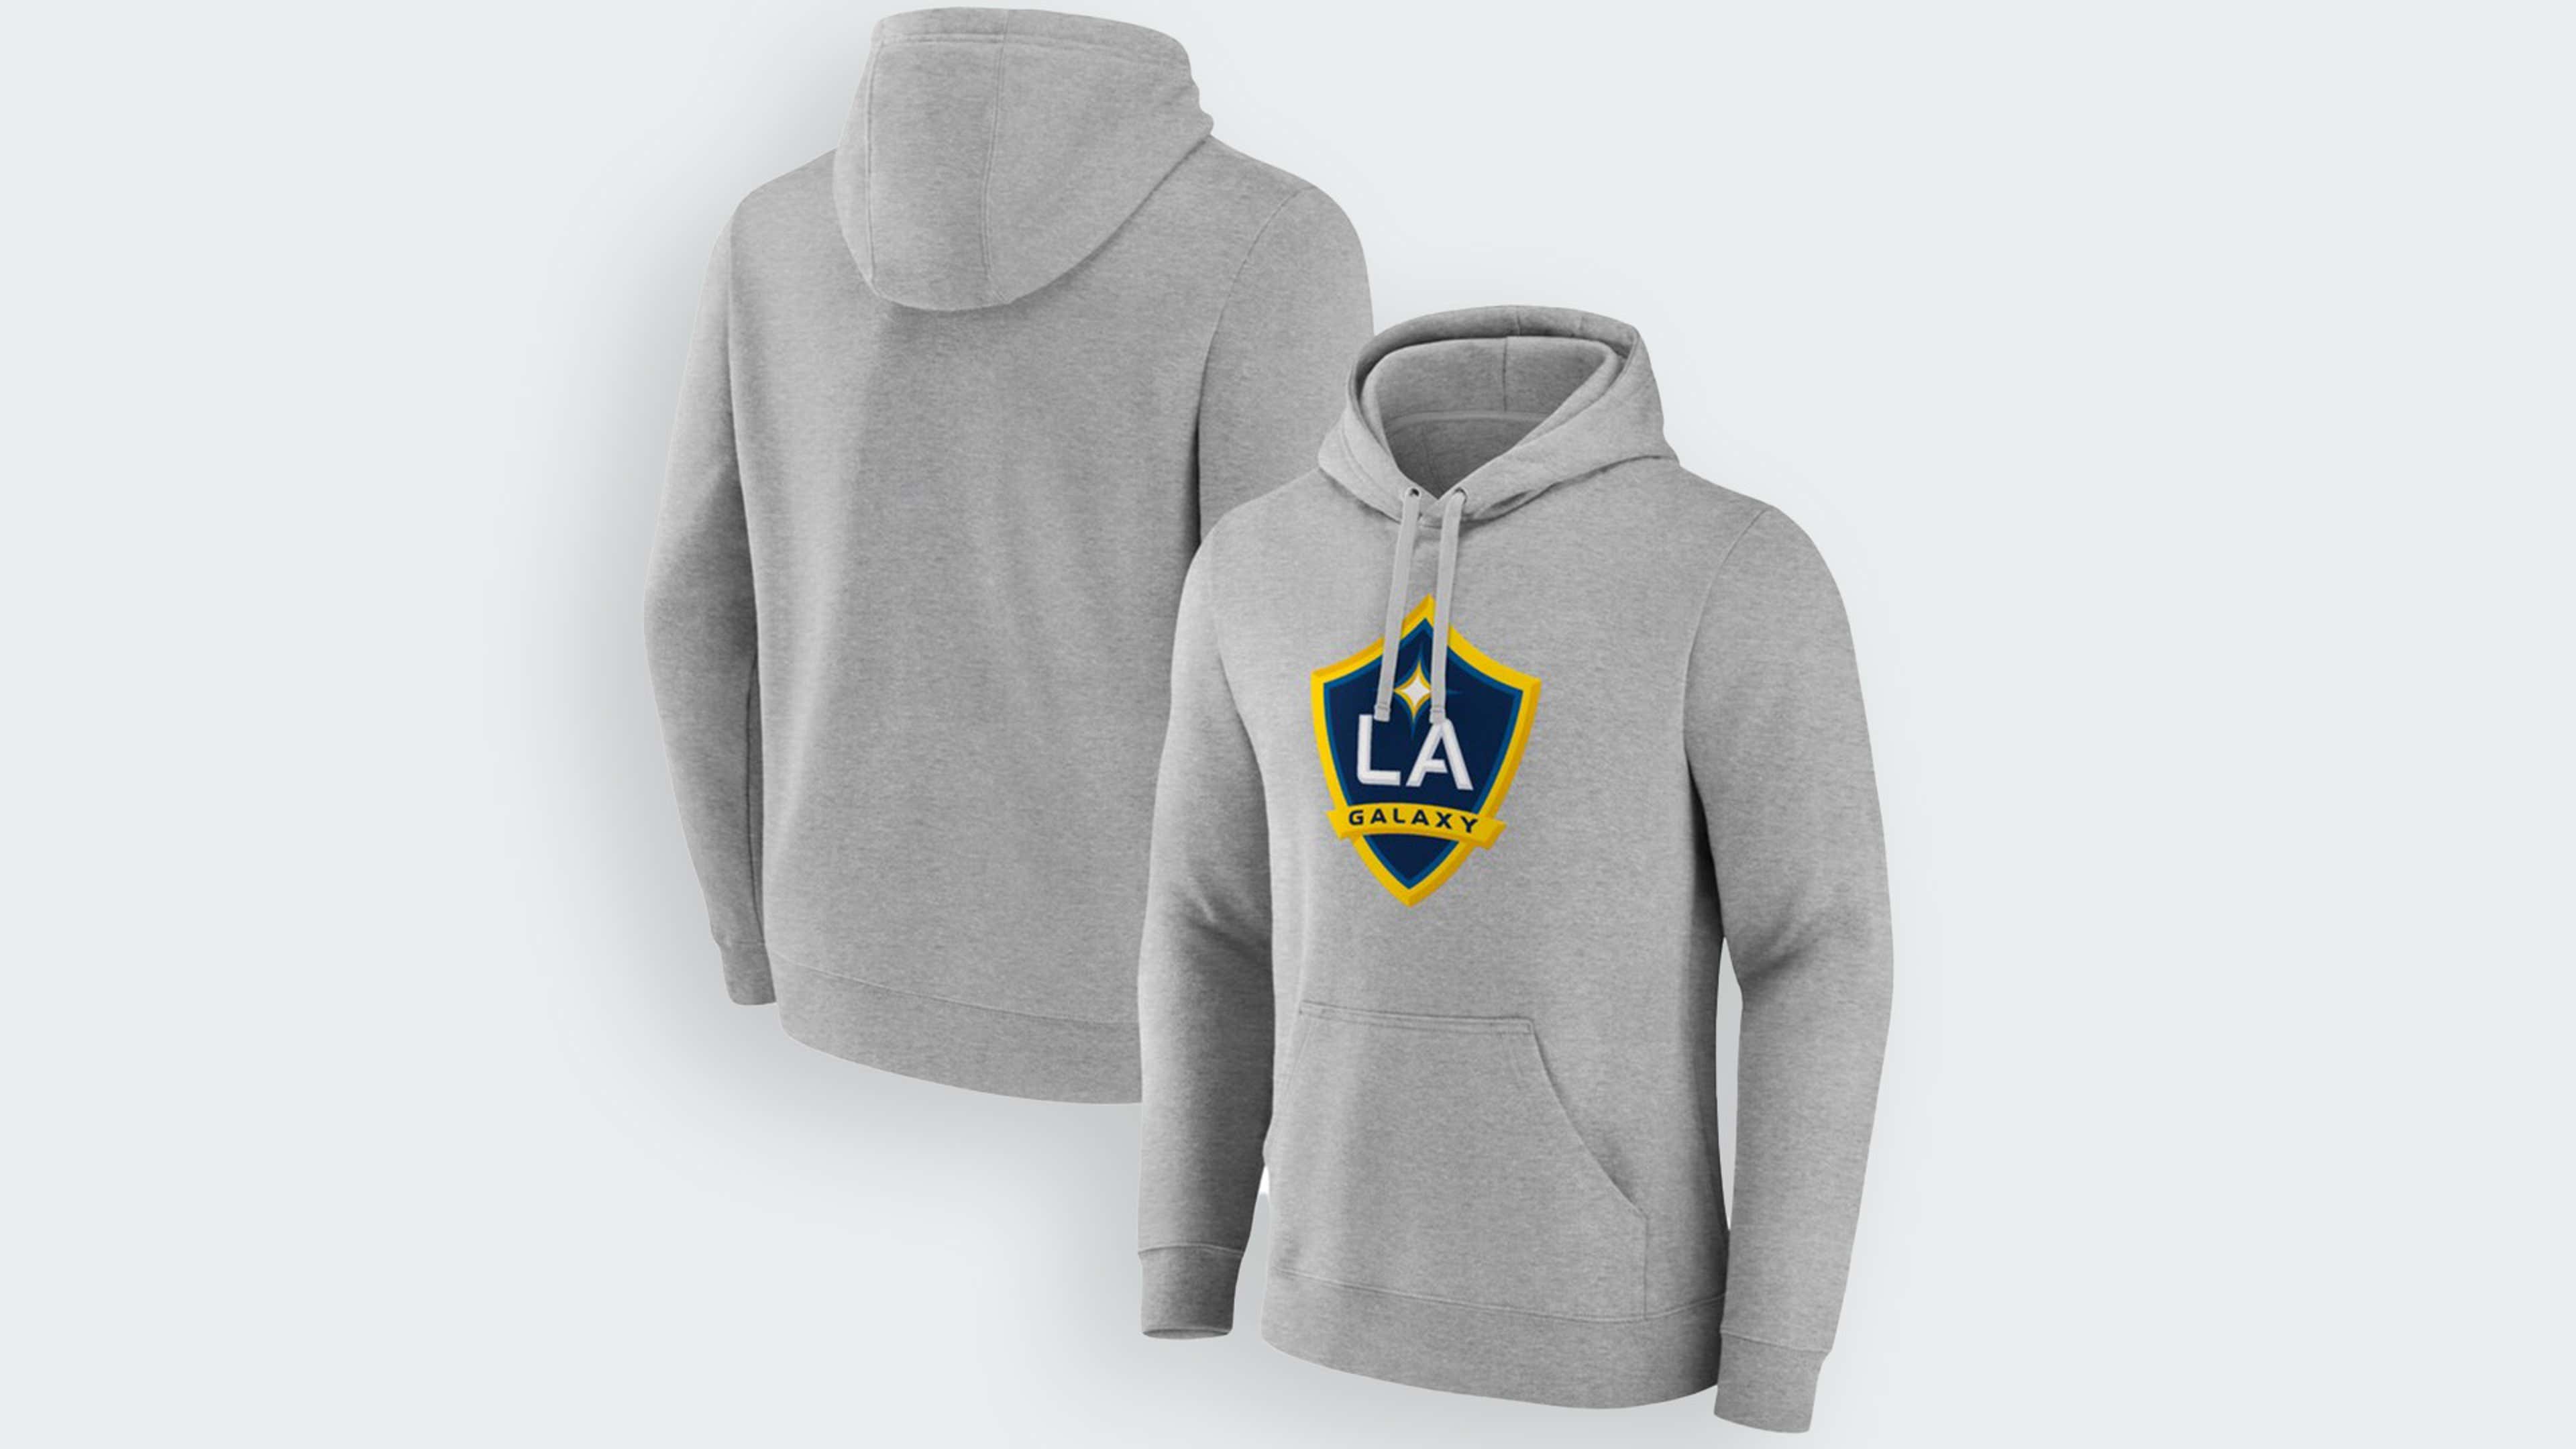 Best LA Galaxy merch 2023: Where can I buy it and how much does it